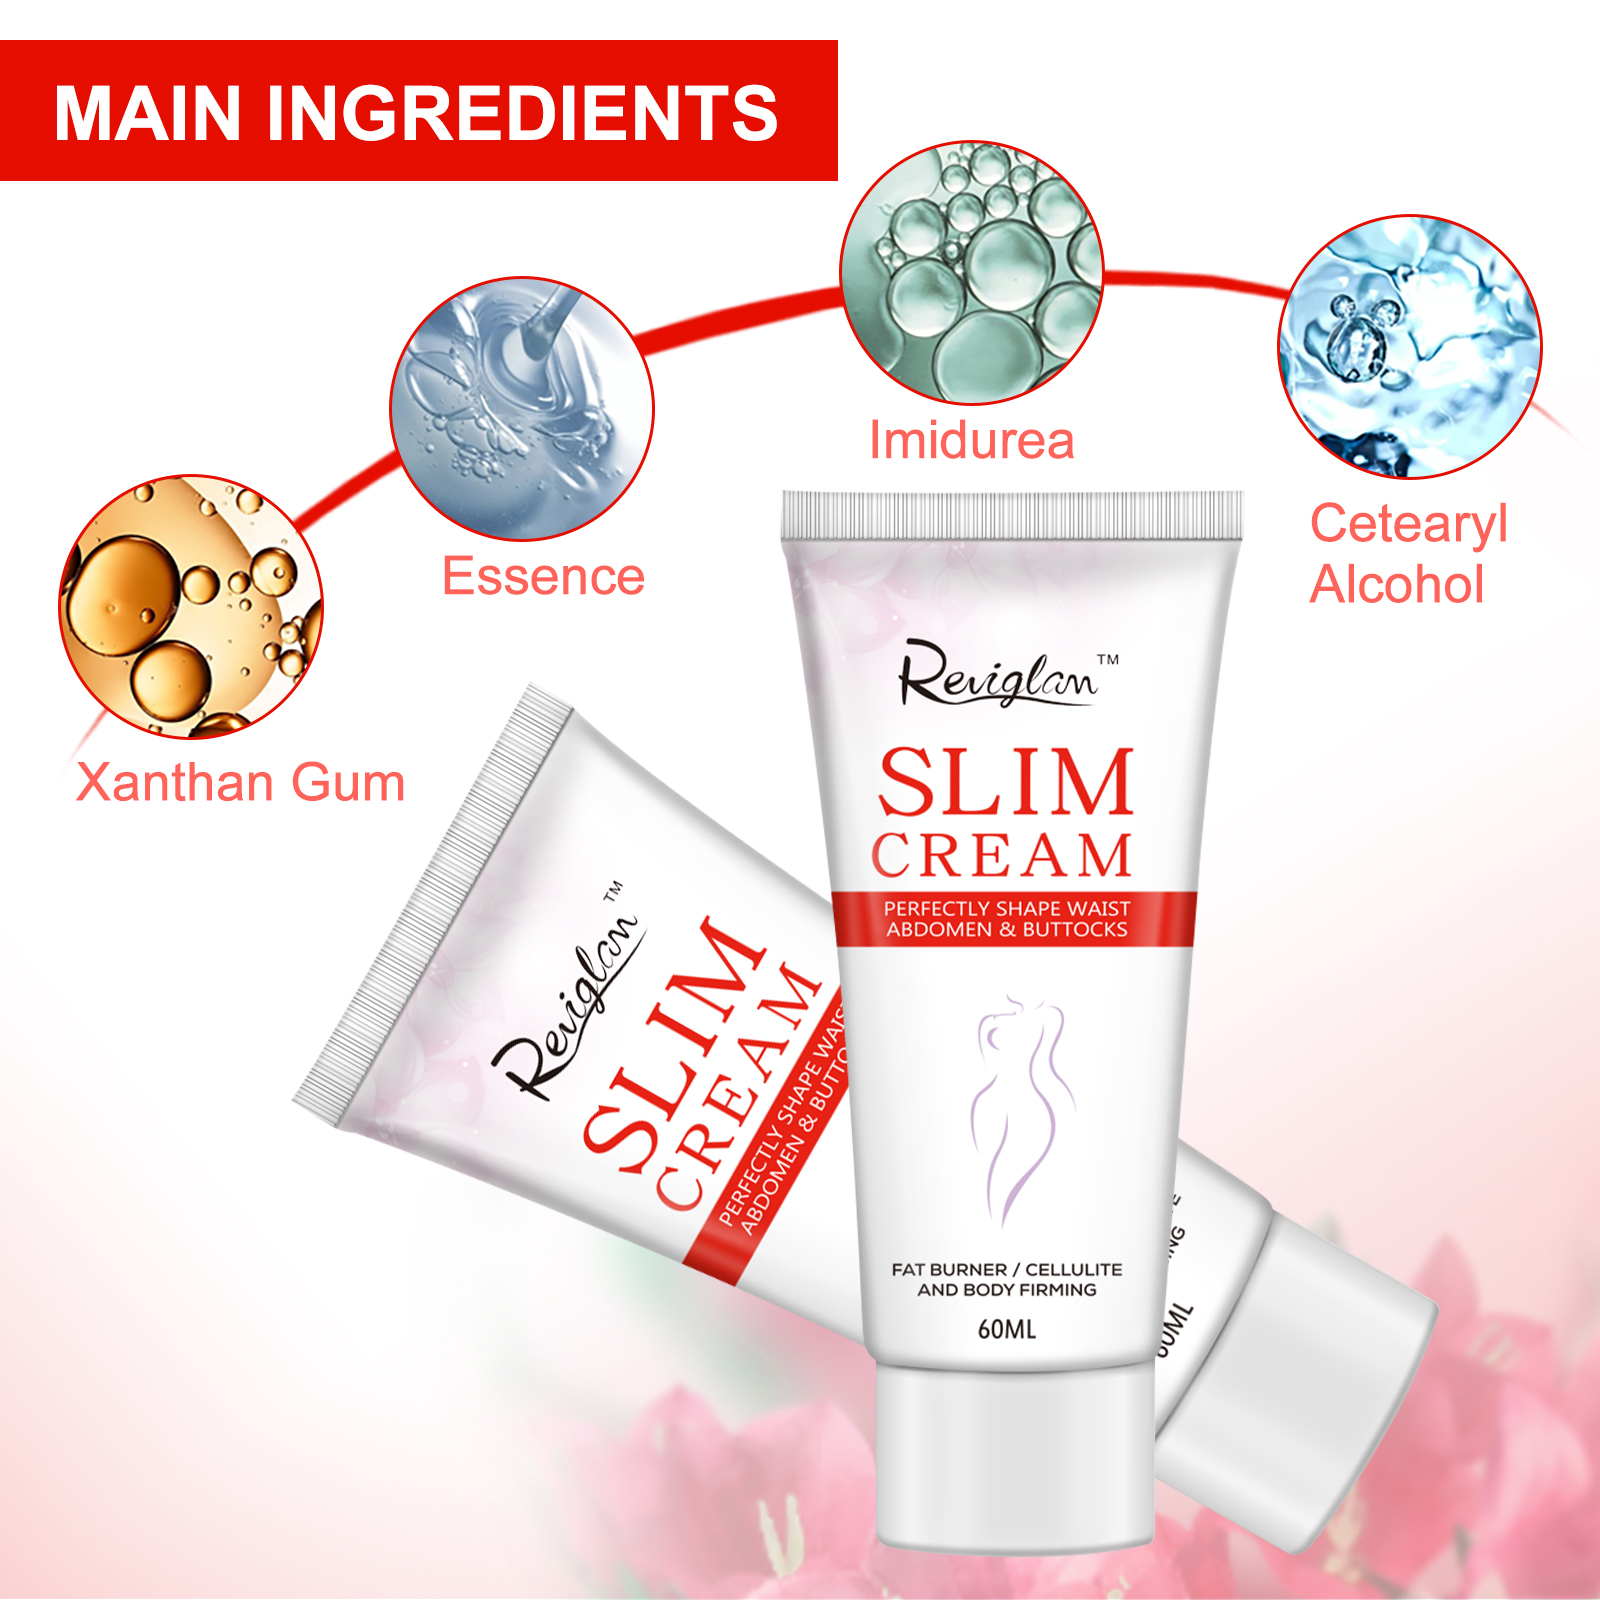 Reviglam Effective Slimming Body Cream Weight Loss Fat Burner Cellulite Removal Full Firming Shape Shaping Waist Abdomen and Buttocks